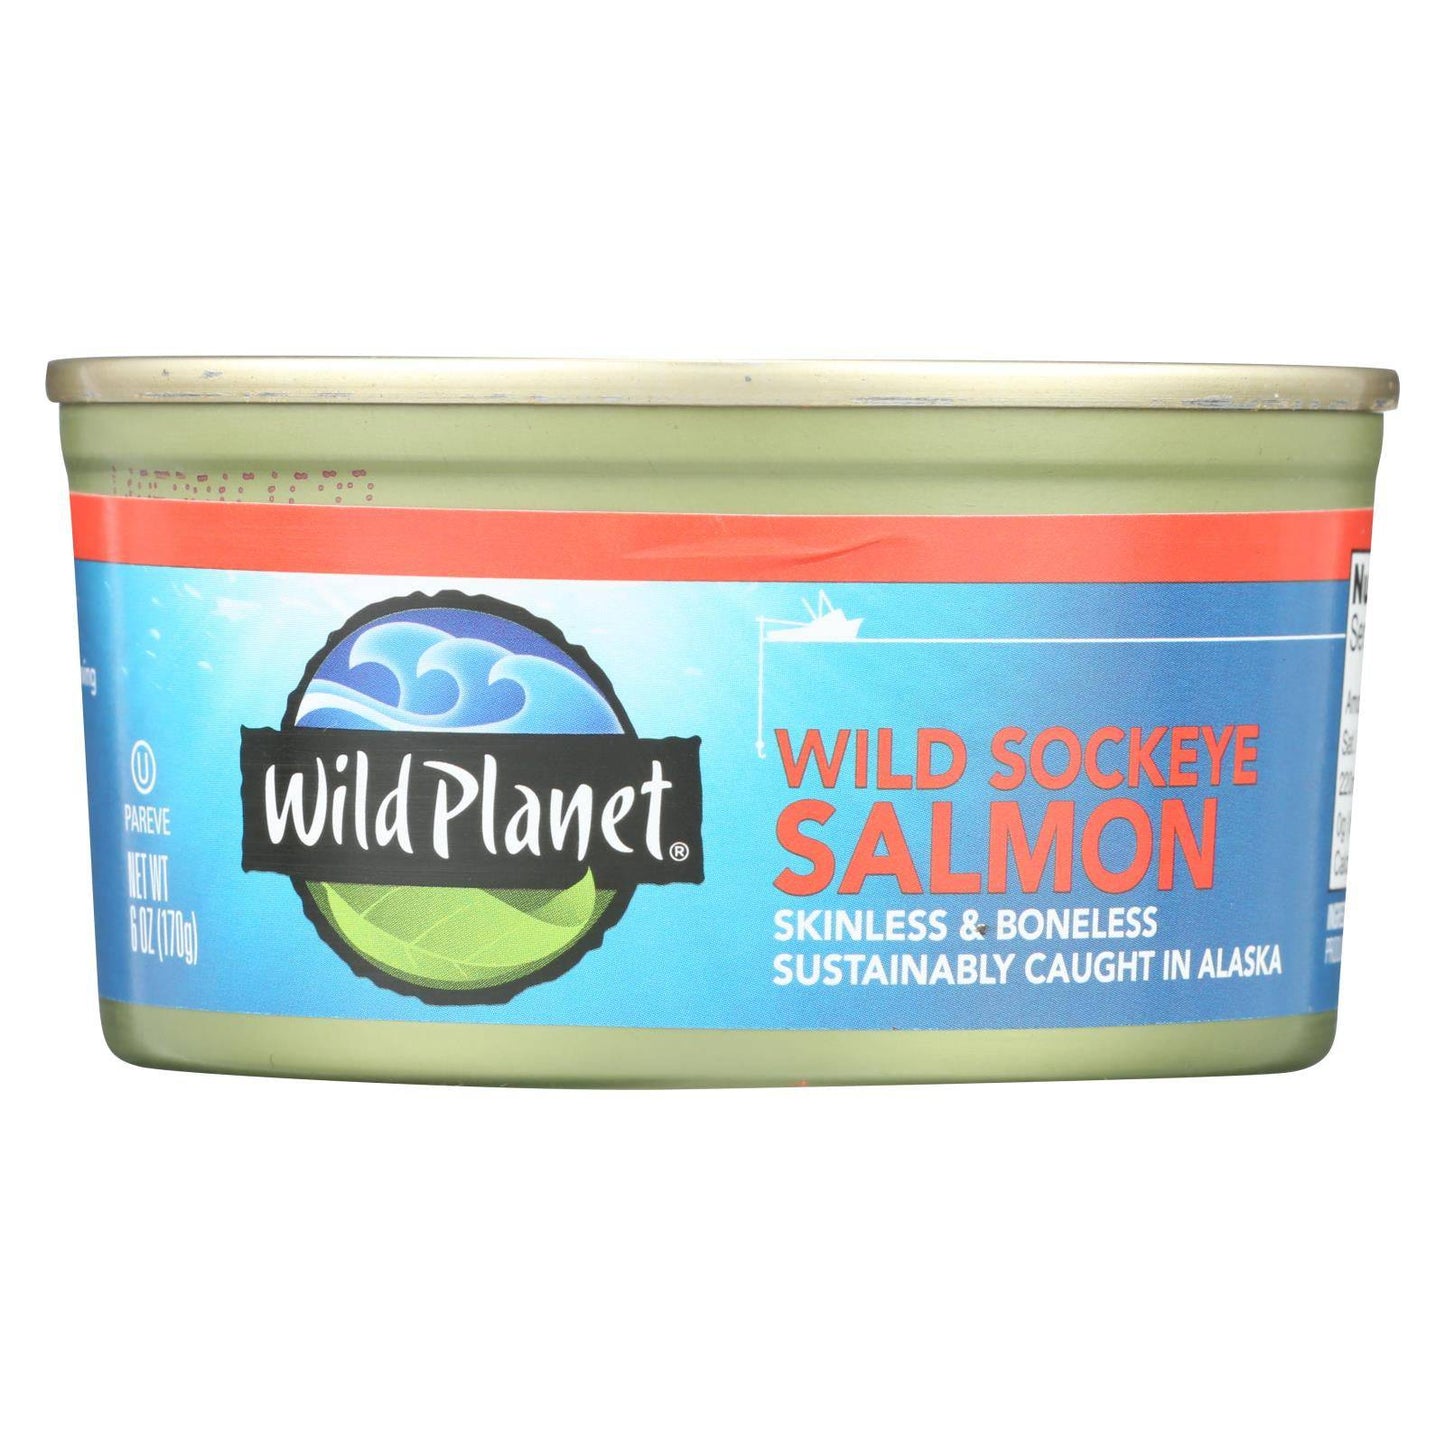 Buy Wild Planet Wild Pacific Sockeye Salmon - Case Of 12 - 6 Oz.  at OnlyNaturals.us